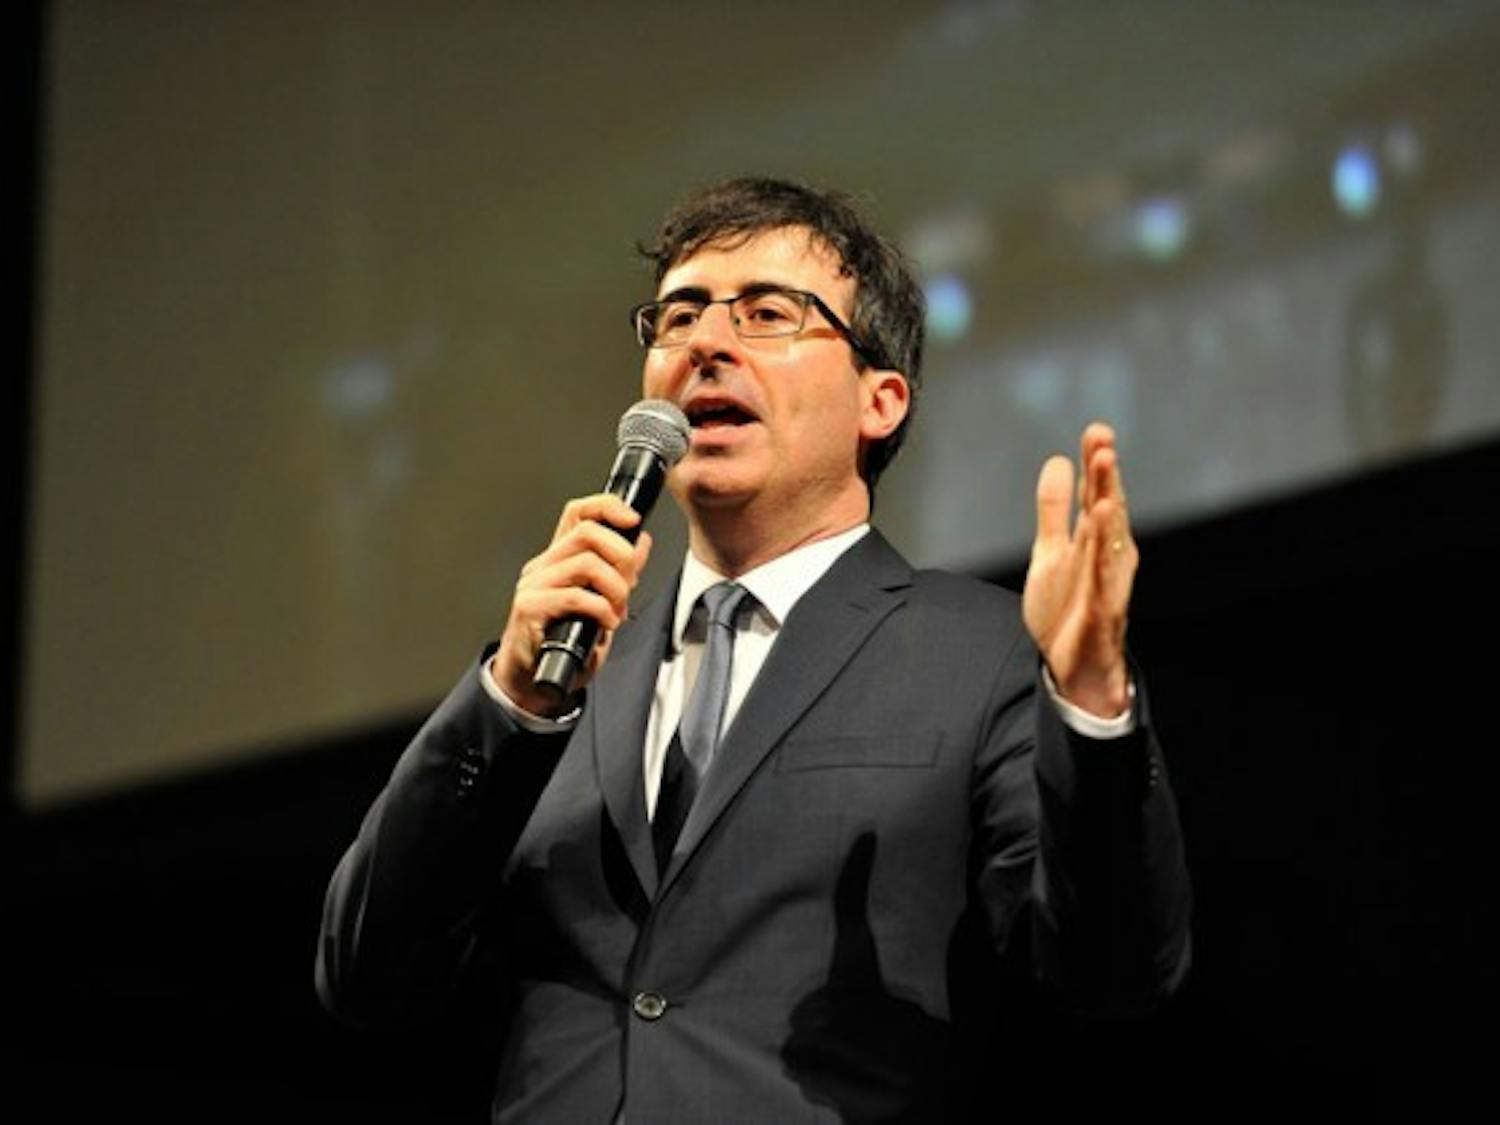 John Oliver, who was supposed to speak at UB Nov. 18, has been postponed to Dec. 3 due to weather concerns.
Courtesy of Steve Jennings